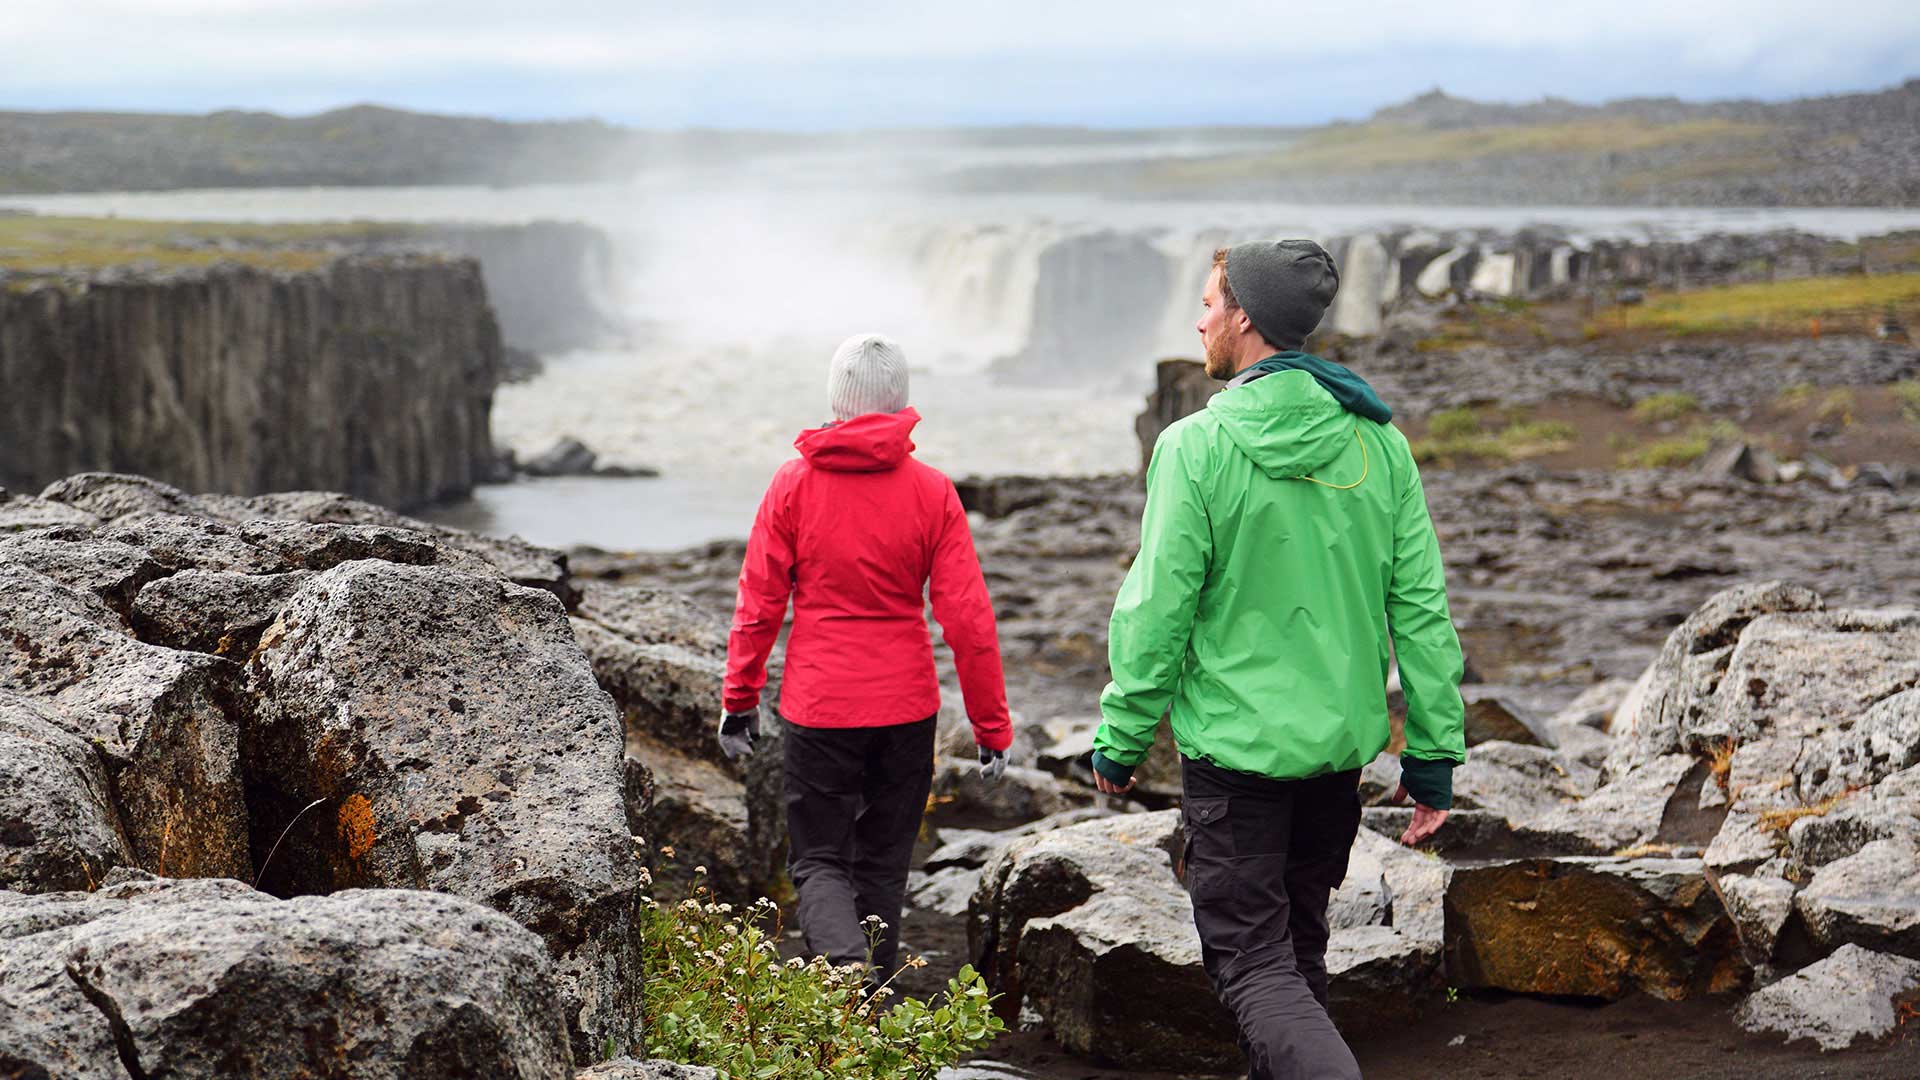 Iceland Guided Tours Group Travel Packages To Iceland Iceland Tours